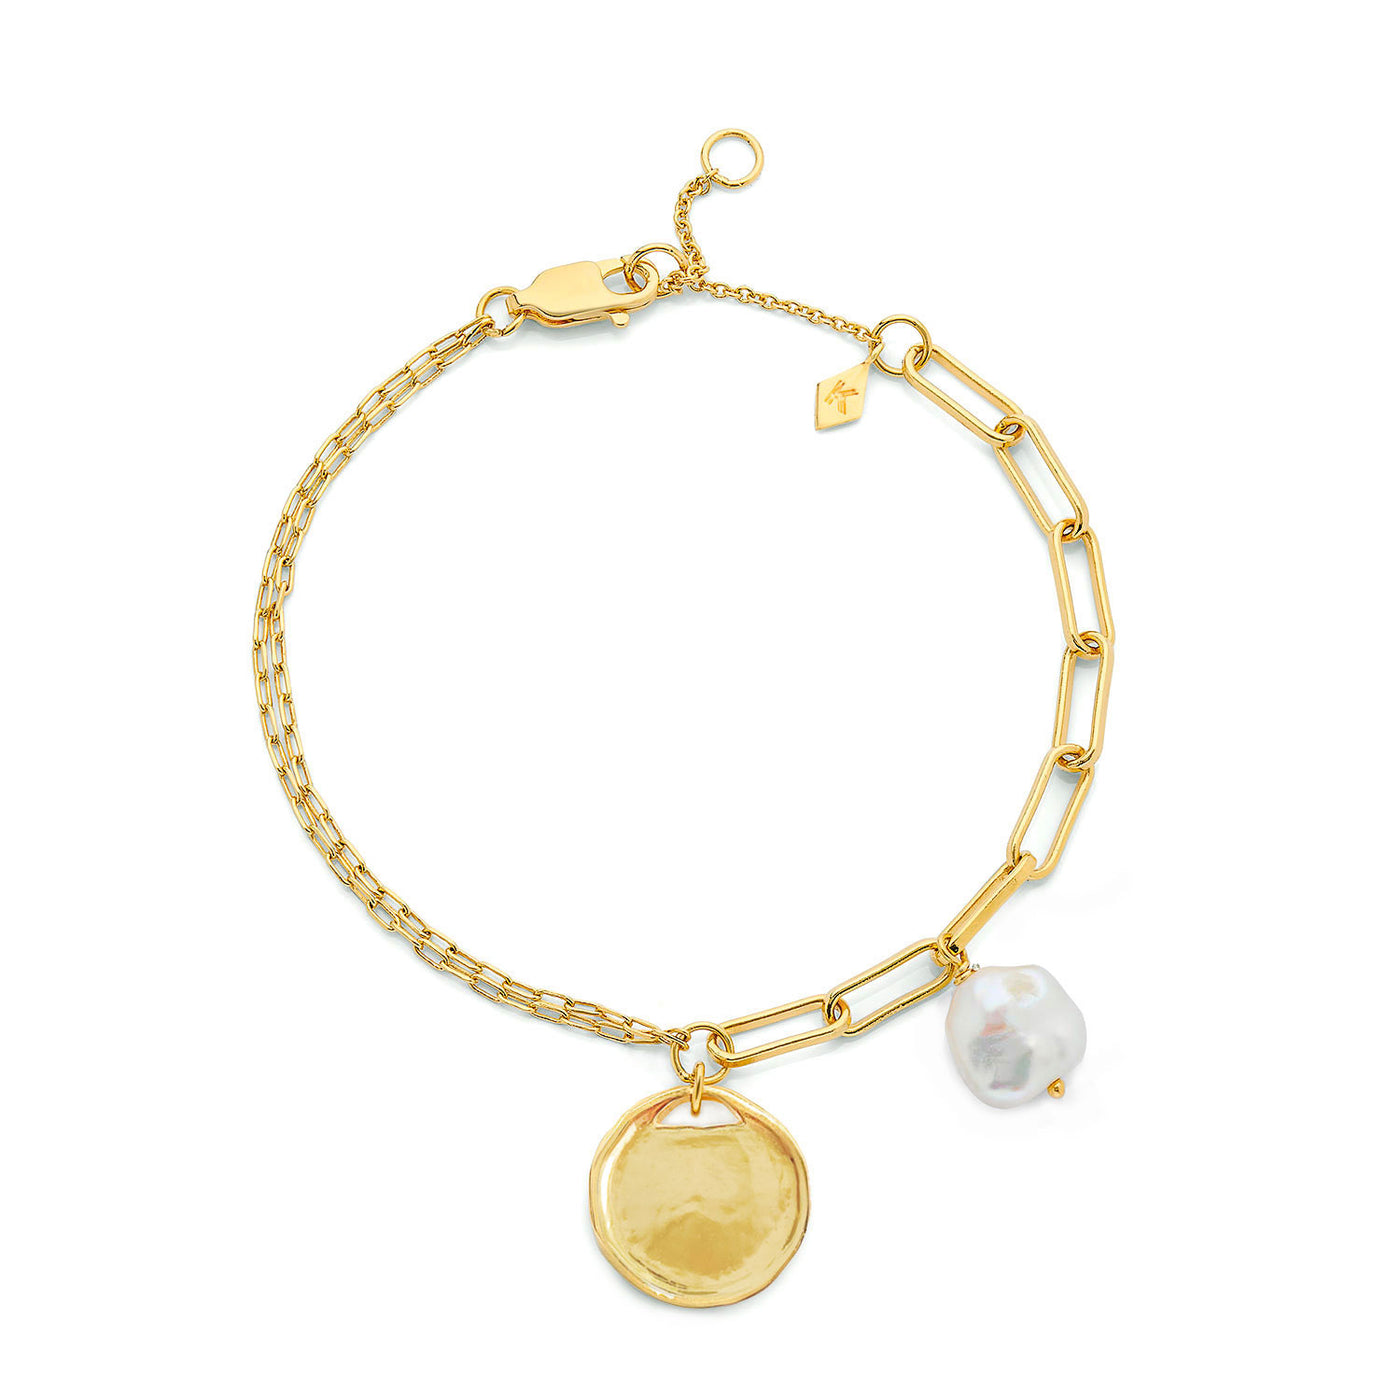 Gold chain bracelet with coin and freshwater pearl charms